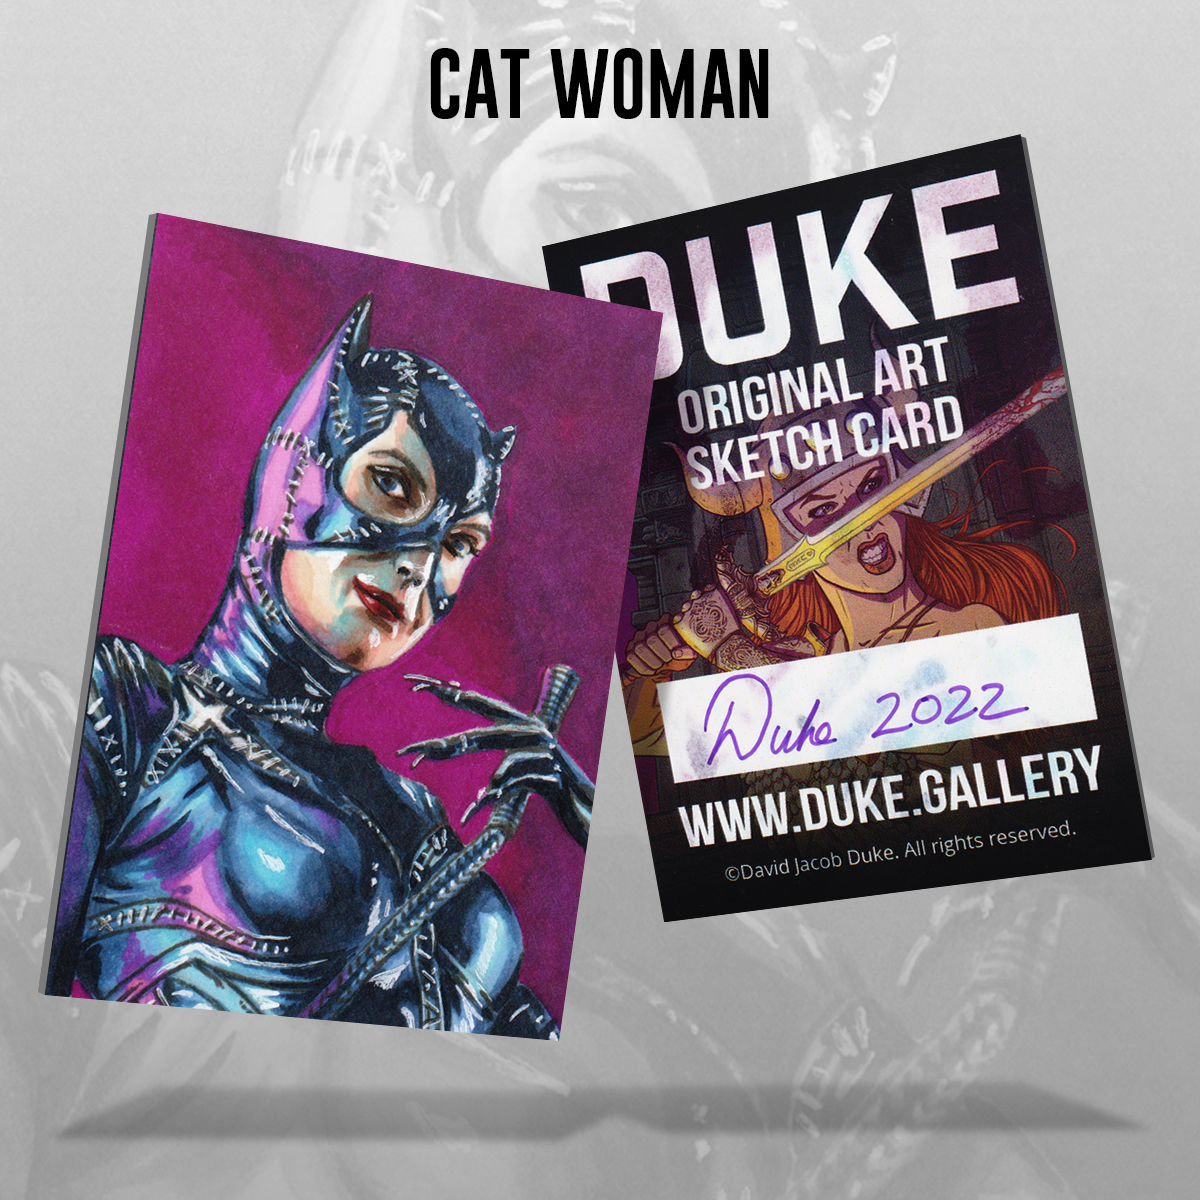 Catwoman Sketch Card by Duke